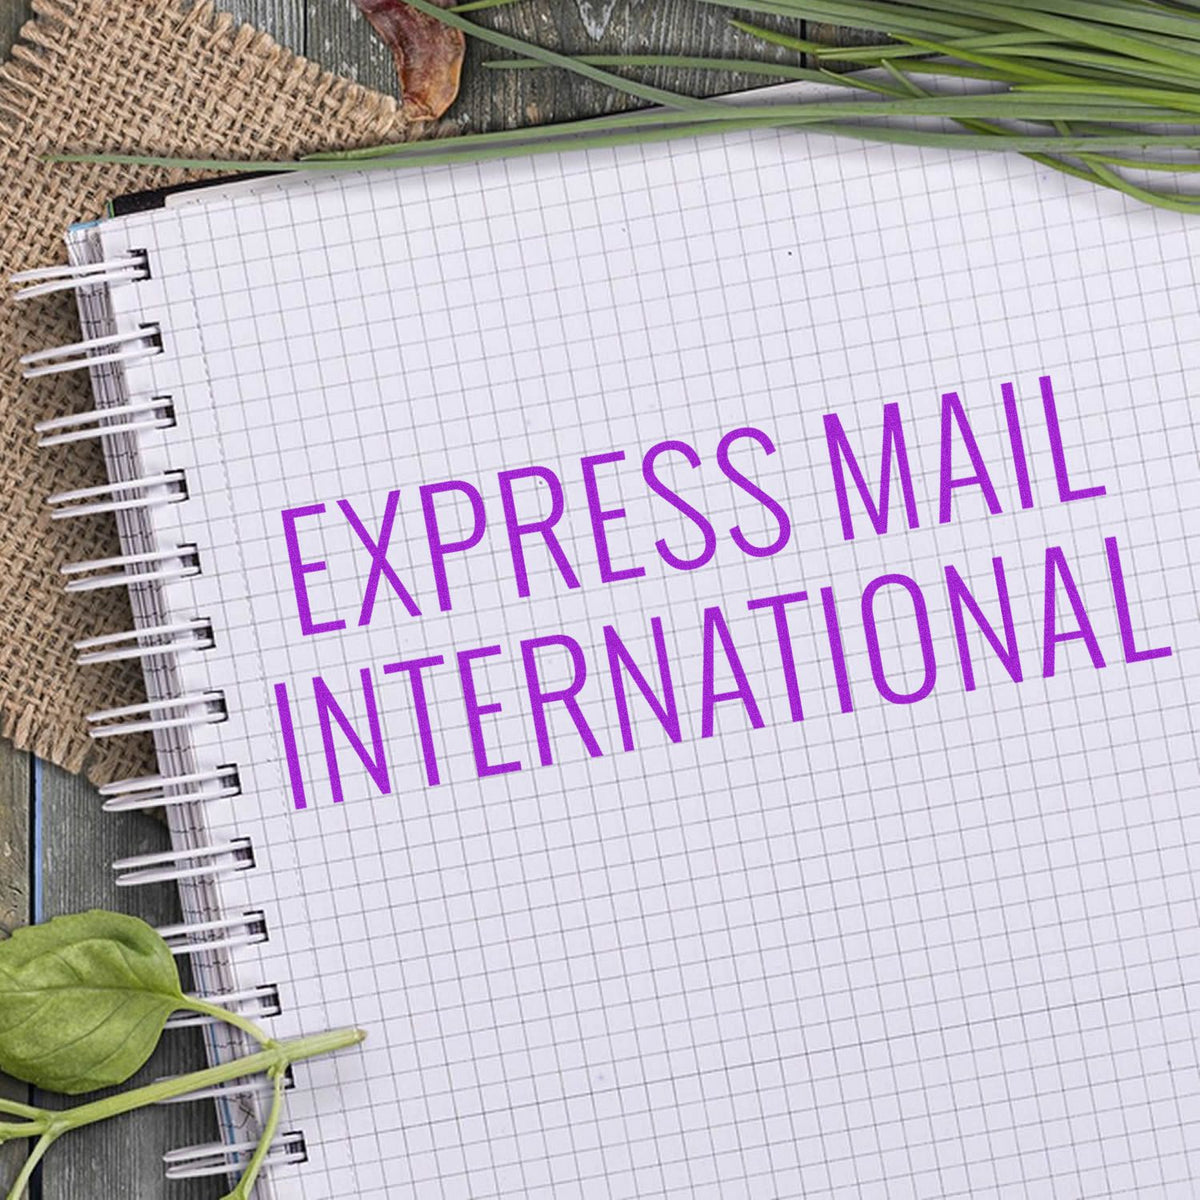 Large Express Mail International Rubber Stamp In Use